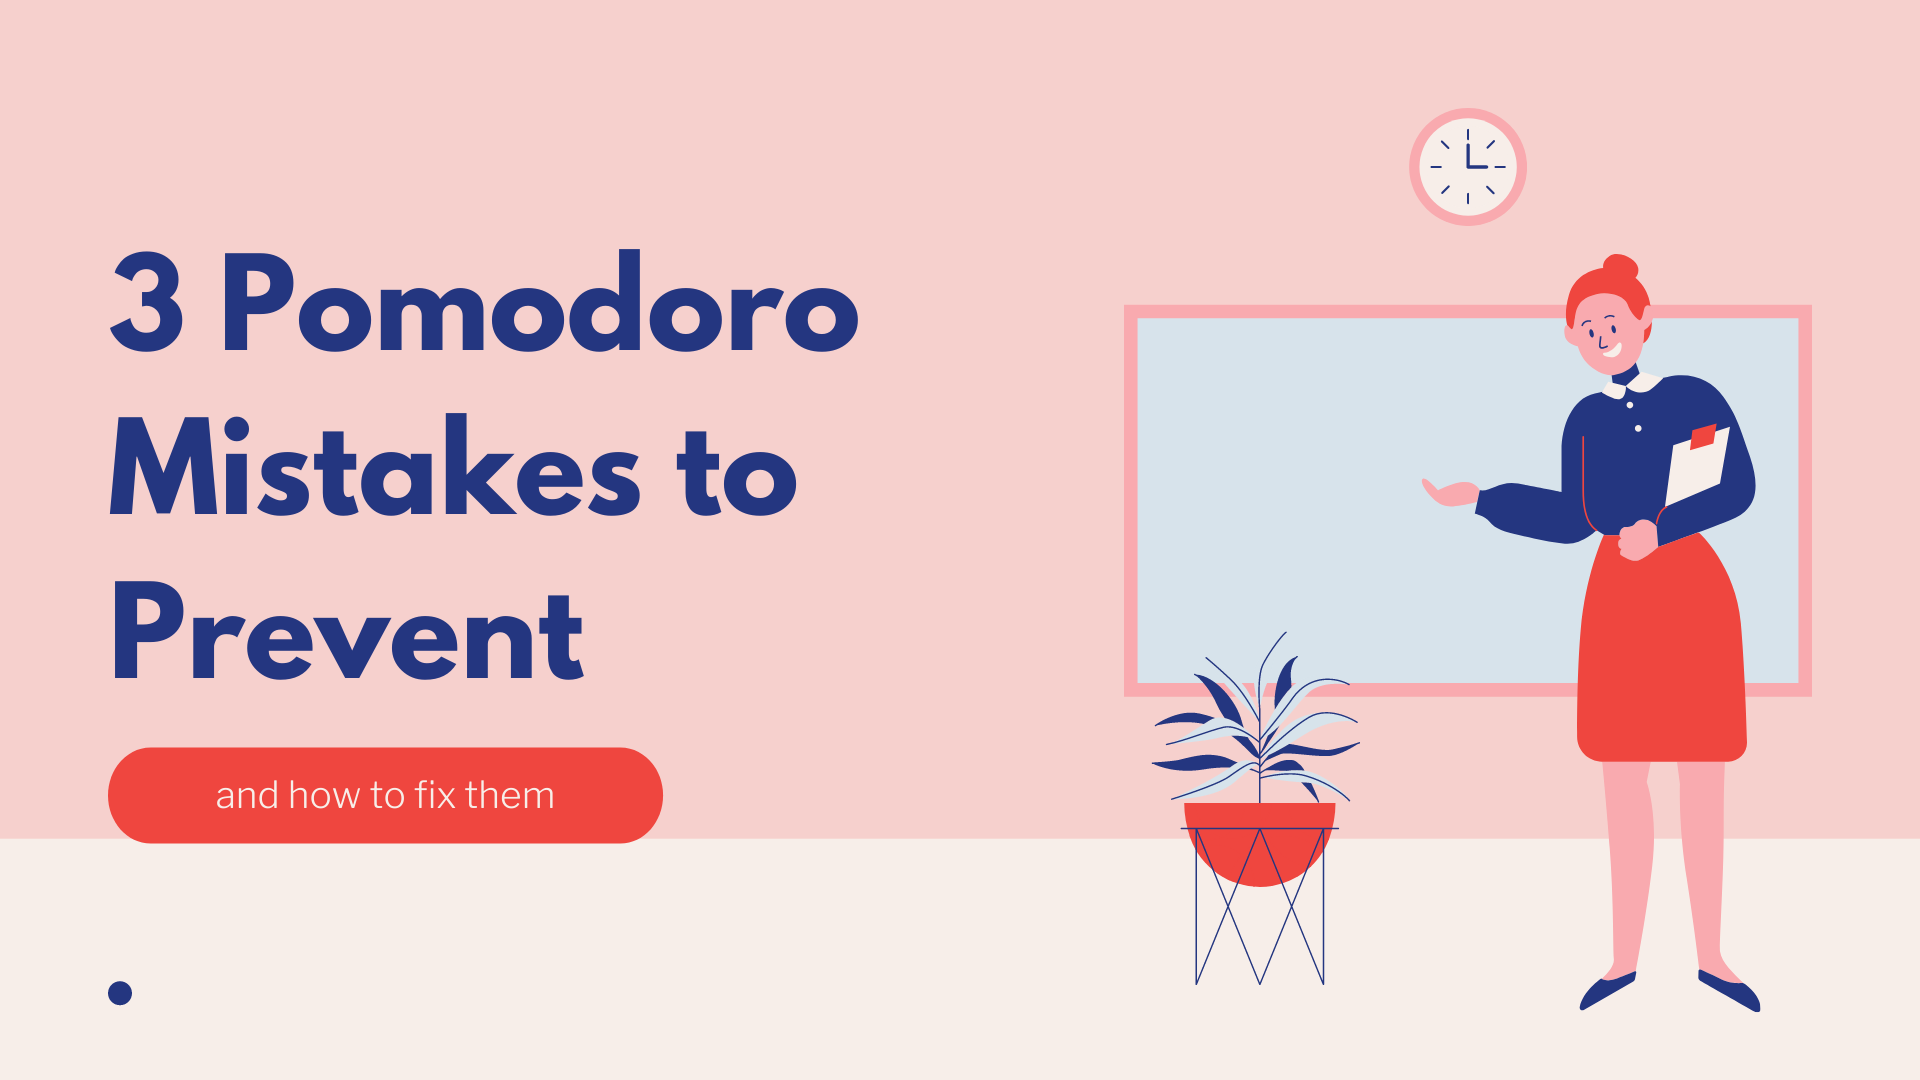 3 Pomodoro Mistakes to Prevent (and How to Fix Them)